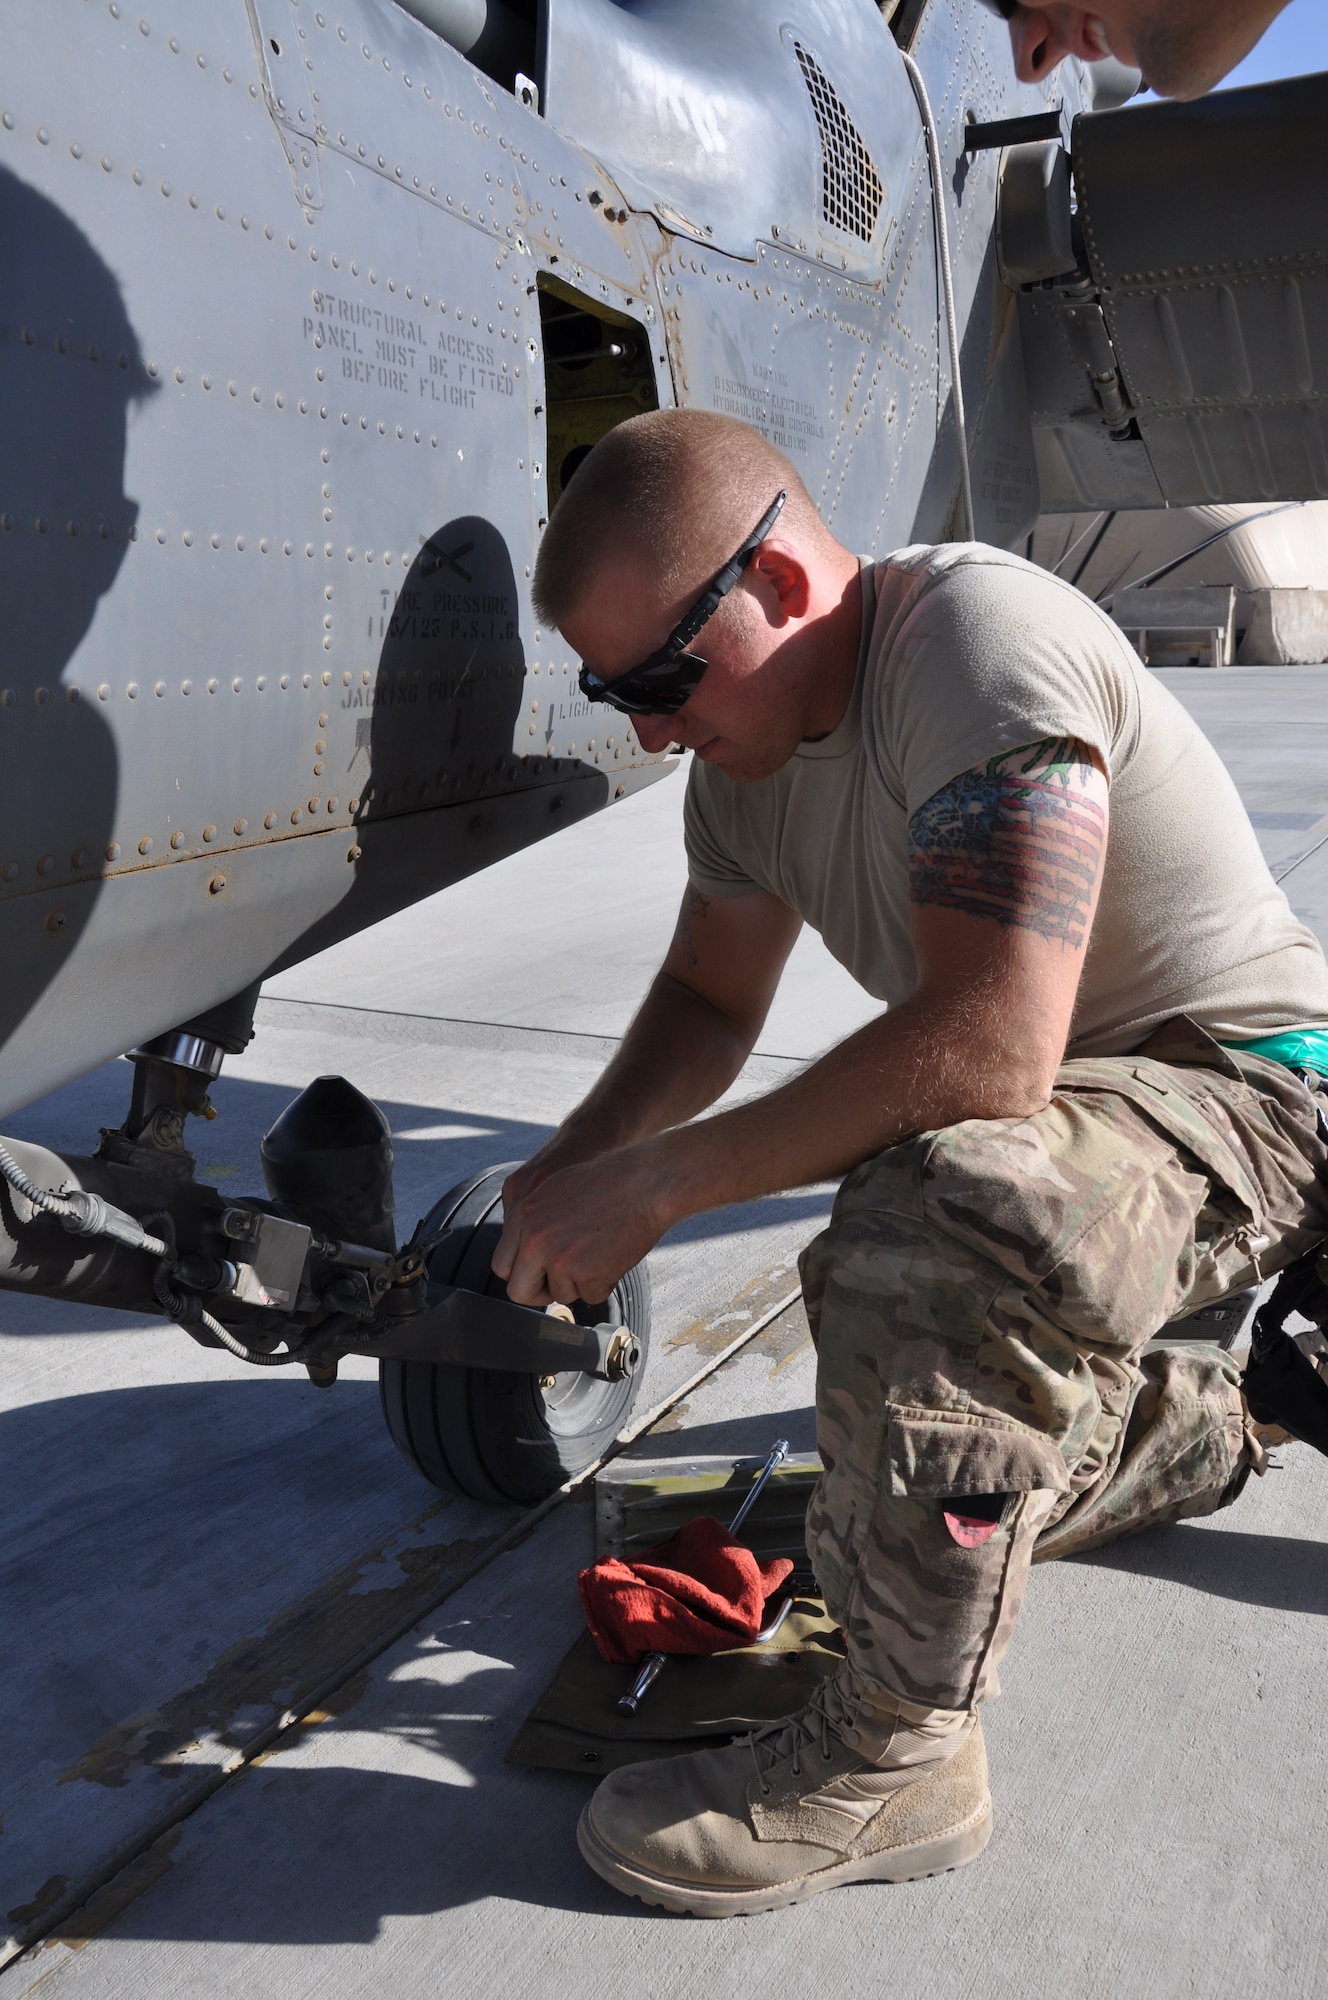 Staff Sgt. Ryan Almy, 455th Expeditionary Maintenance Squadron, helps conduct a 50-hour preventative maintenance inspection on aircraft 89-6205, an HH-60G Pave Hawk helicopter assigned to the 56th Expeditionary Helicopter Maintenance Unit at Bagram Airfield, Afghanistan, July 24, 2013. The helo achieved the coveted black-letter initial exceptional release July 23, 2013, for the first time in the unit since 2005. After the ER was signed, the HH-60 launched as part of a mission attributed to saving two lives later the same day. Aircraft 89-6205 happens to be the same aircraft that attained the status for the unit eight years ago. (U.S. Air Force photo/Tech. Sgt. Rob Hazelett) 